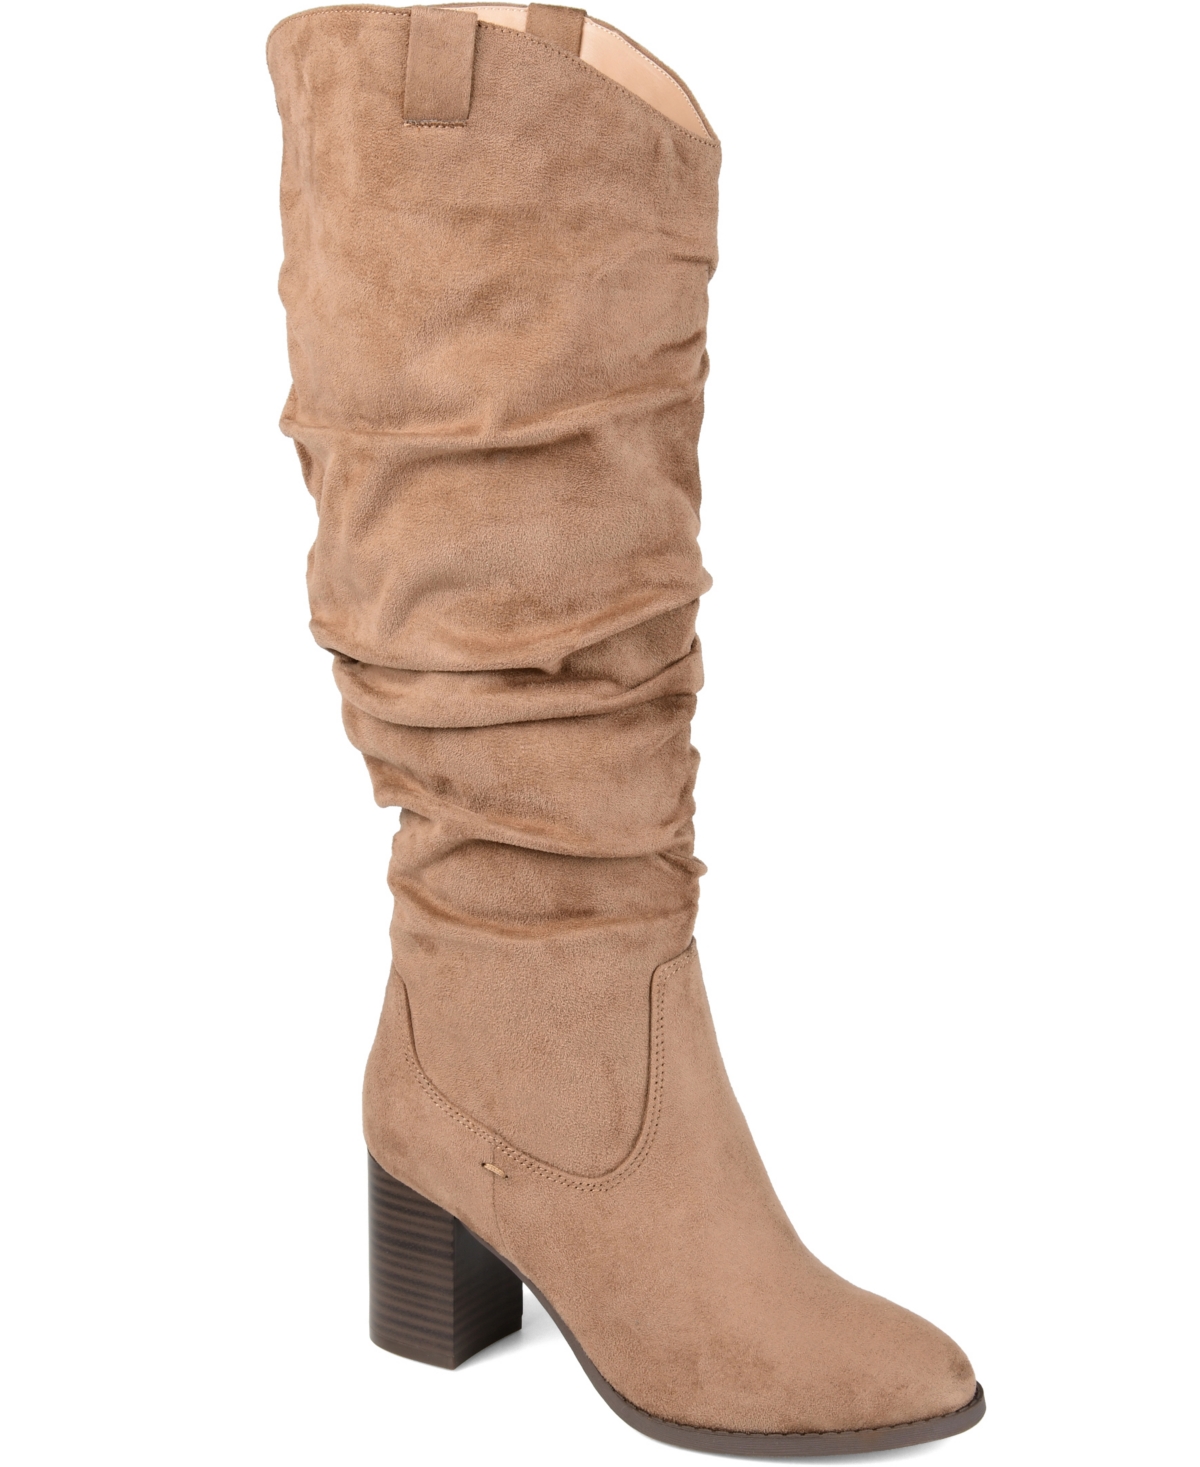 80s Shoes, Sneakers, Boots, Heels, Jelly Flats | 1980s Shoes Journee Collection Womens Aneil Wide Calf Boots - Taupe $82.49 AT vintagedancer.com